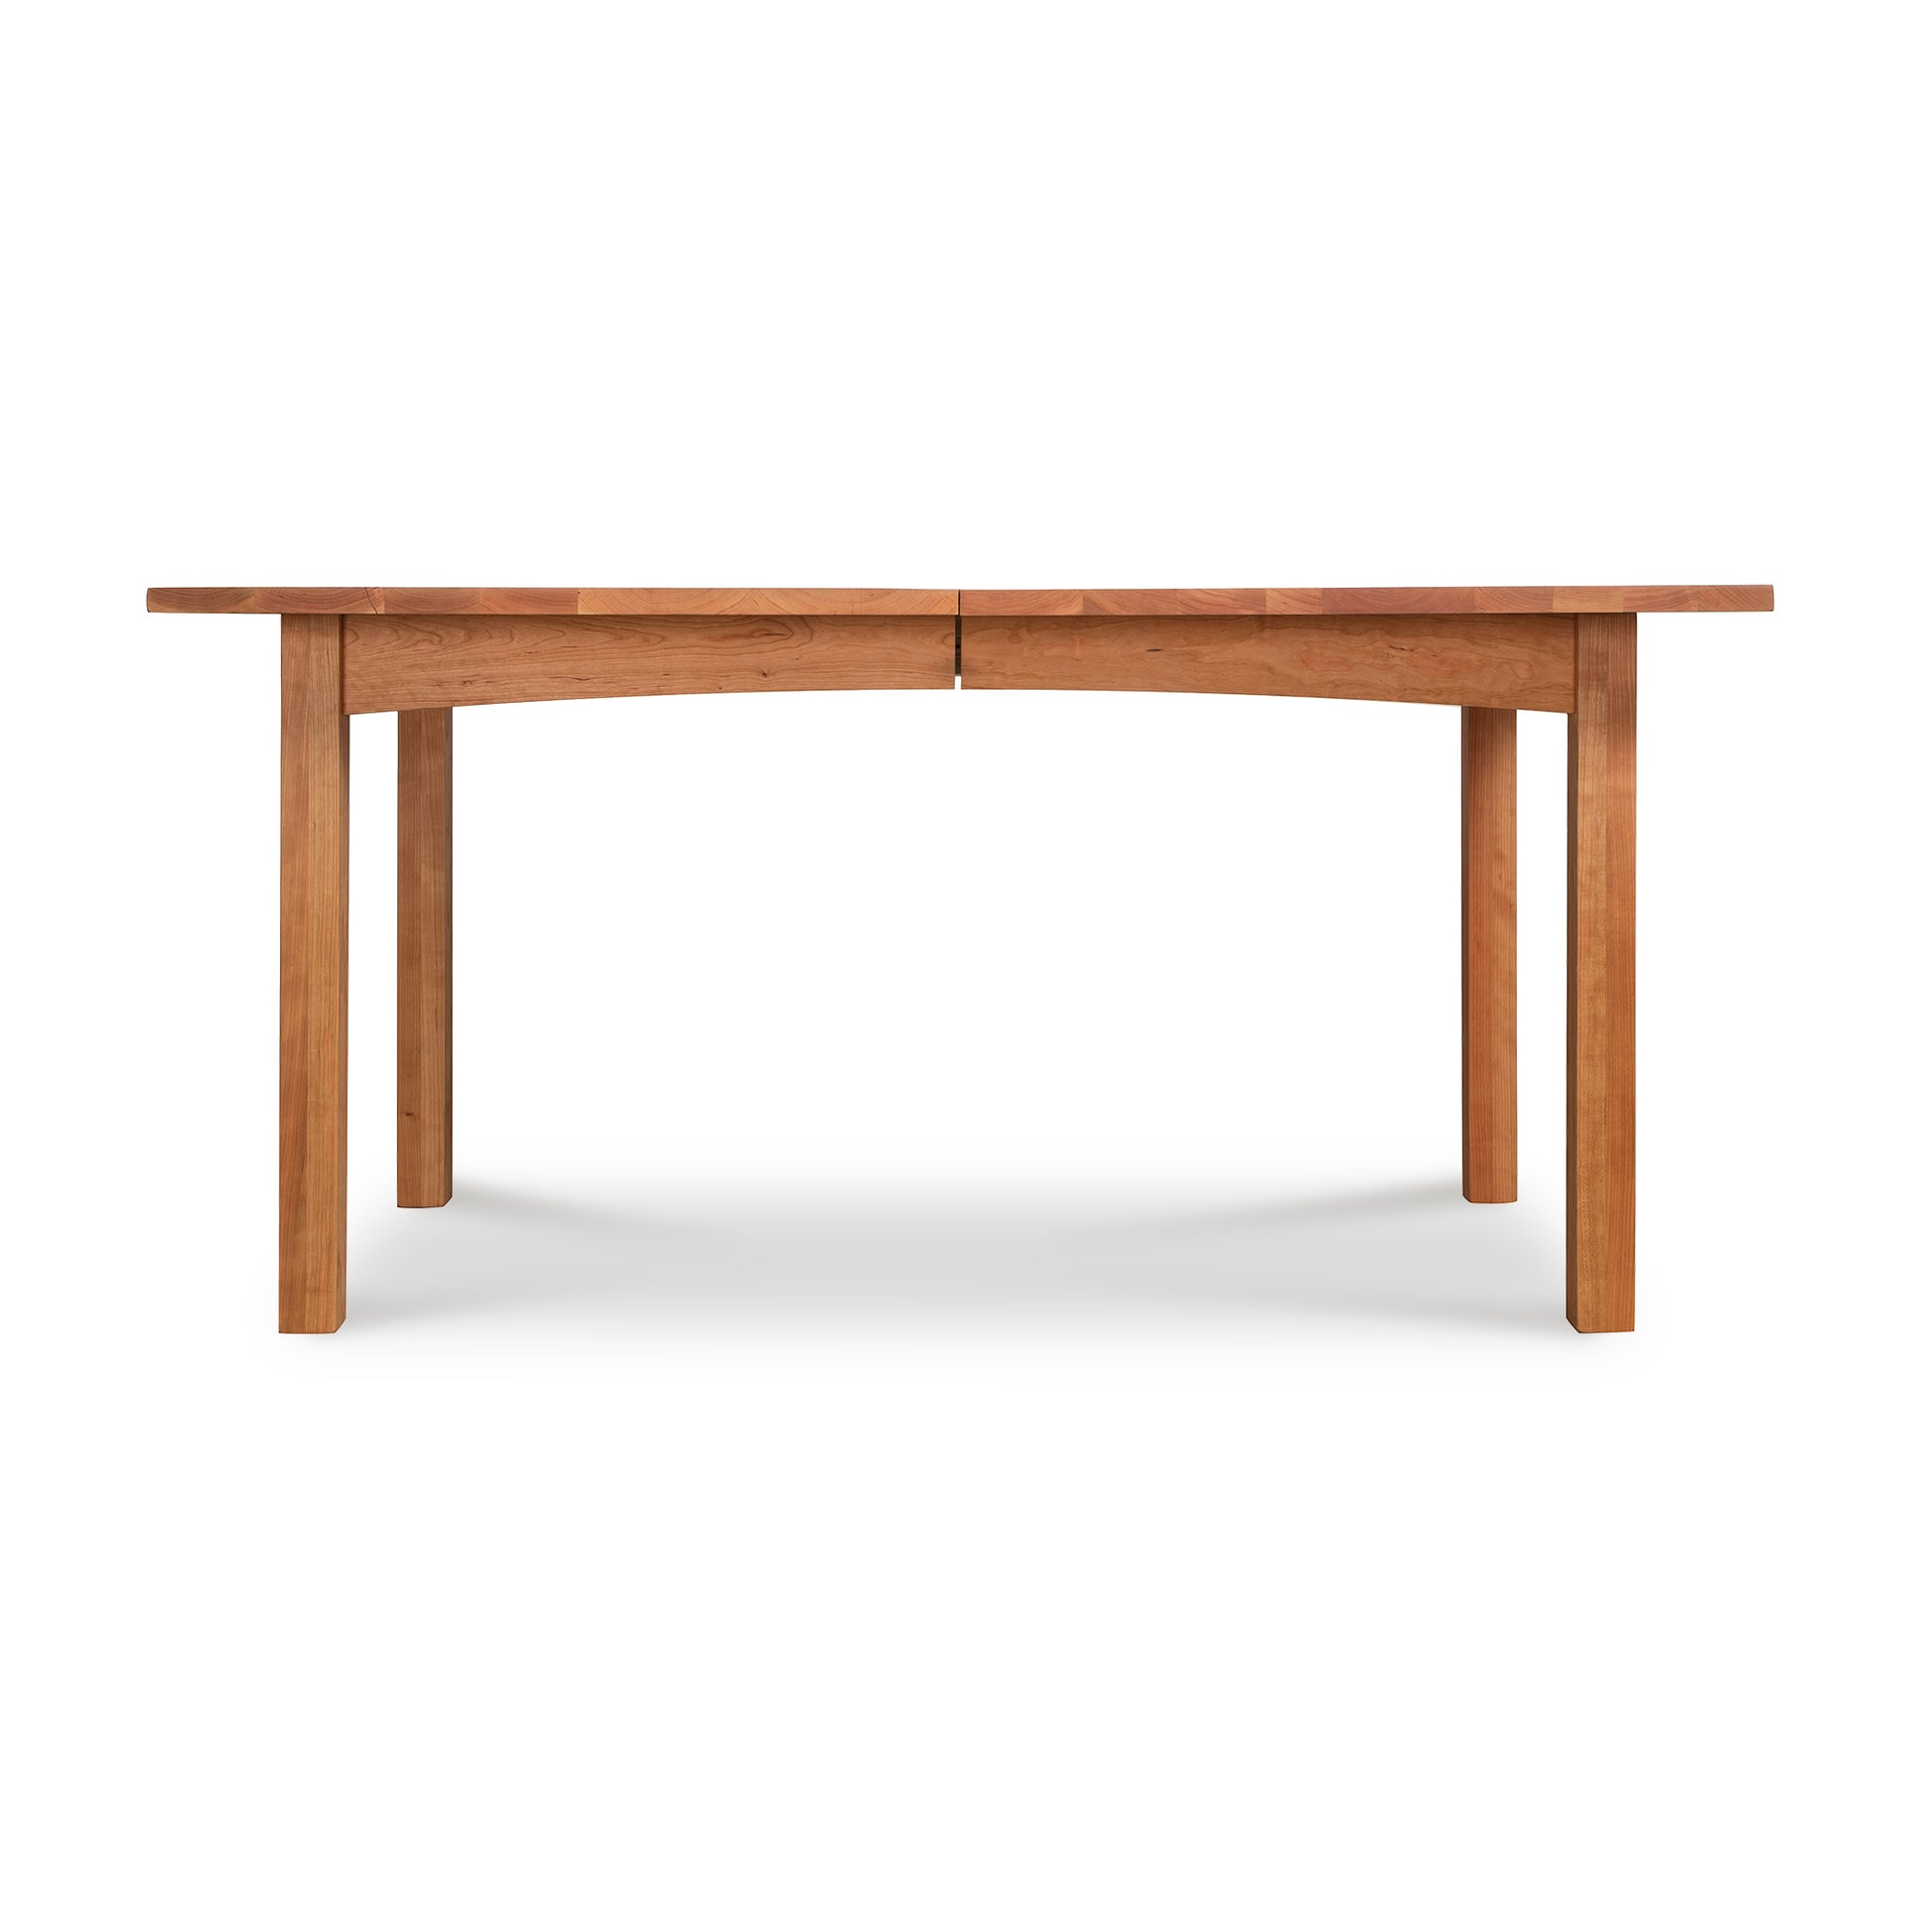 A solid woods Vermont Furniture Designs Burlington Shaker Extension Dining Table with a simple design, having four legs and a rectangular top, isolated on a white background.